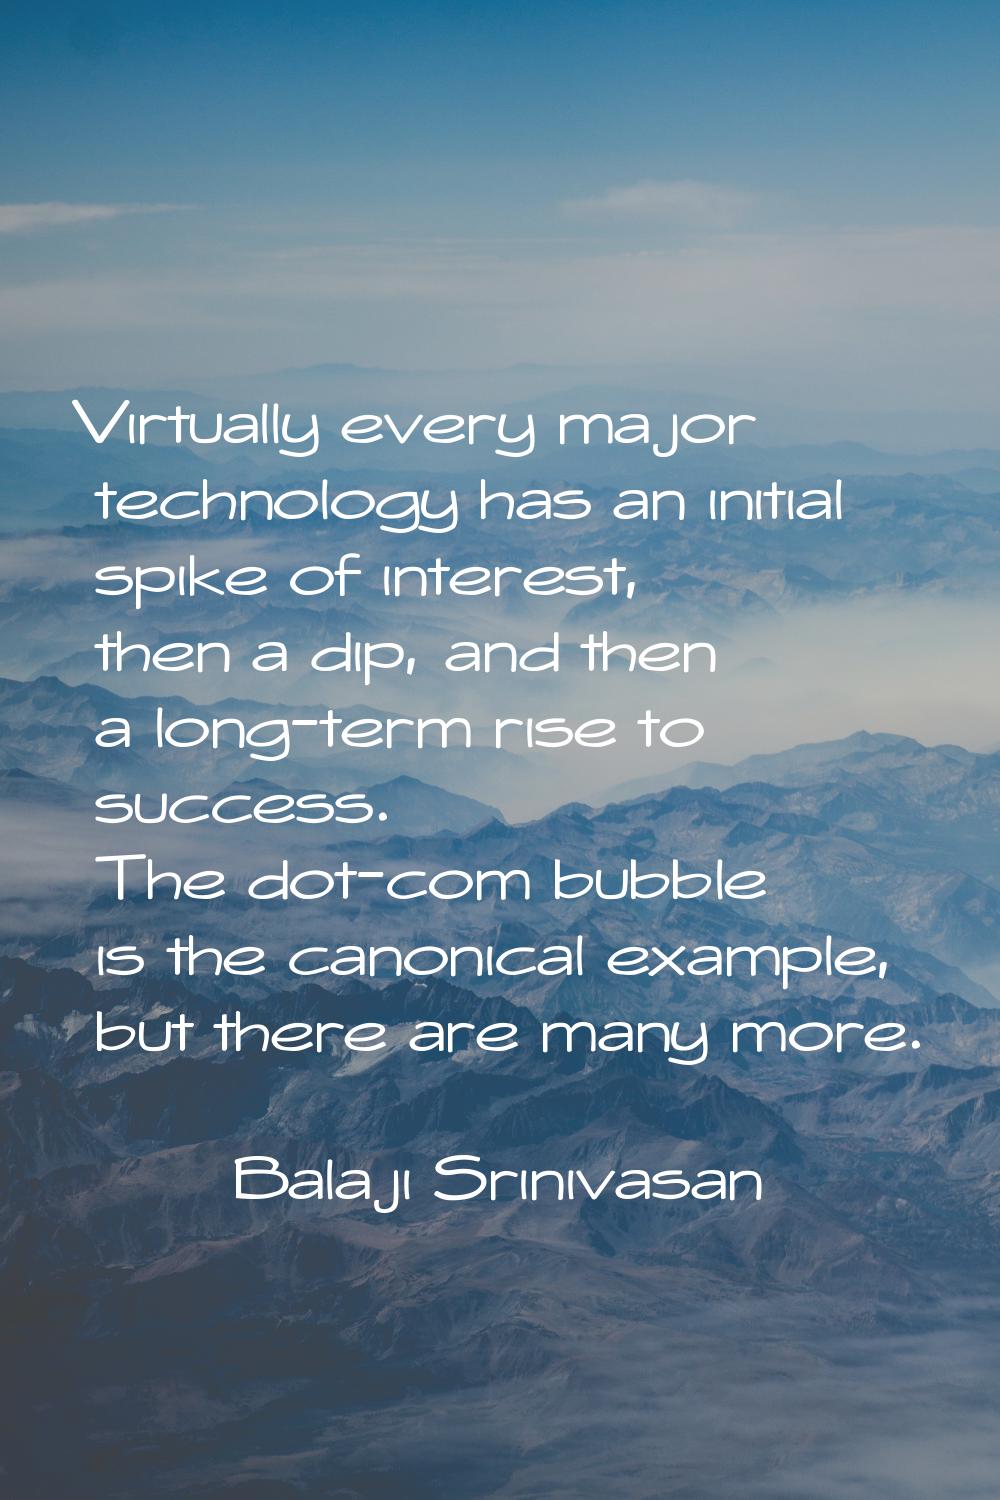 Virtually every major technology has an initial spike of interest, then a dip, and then a long-term